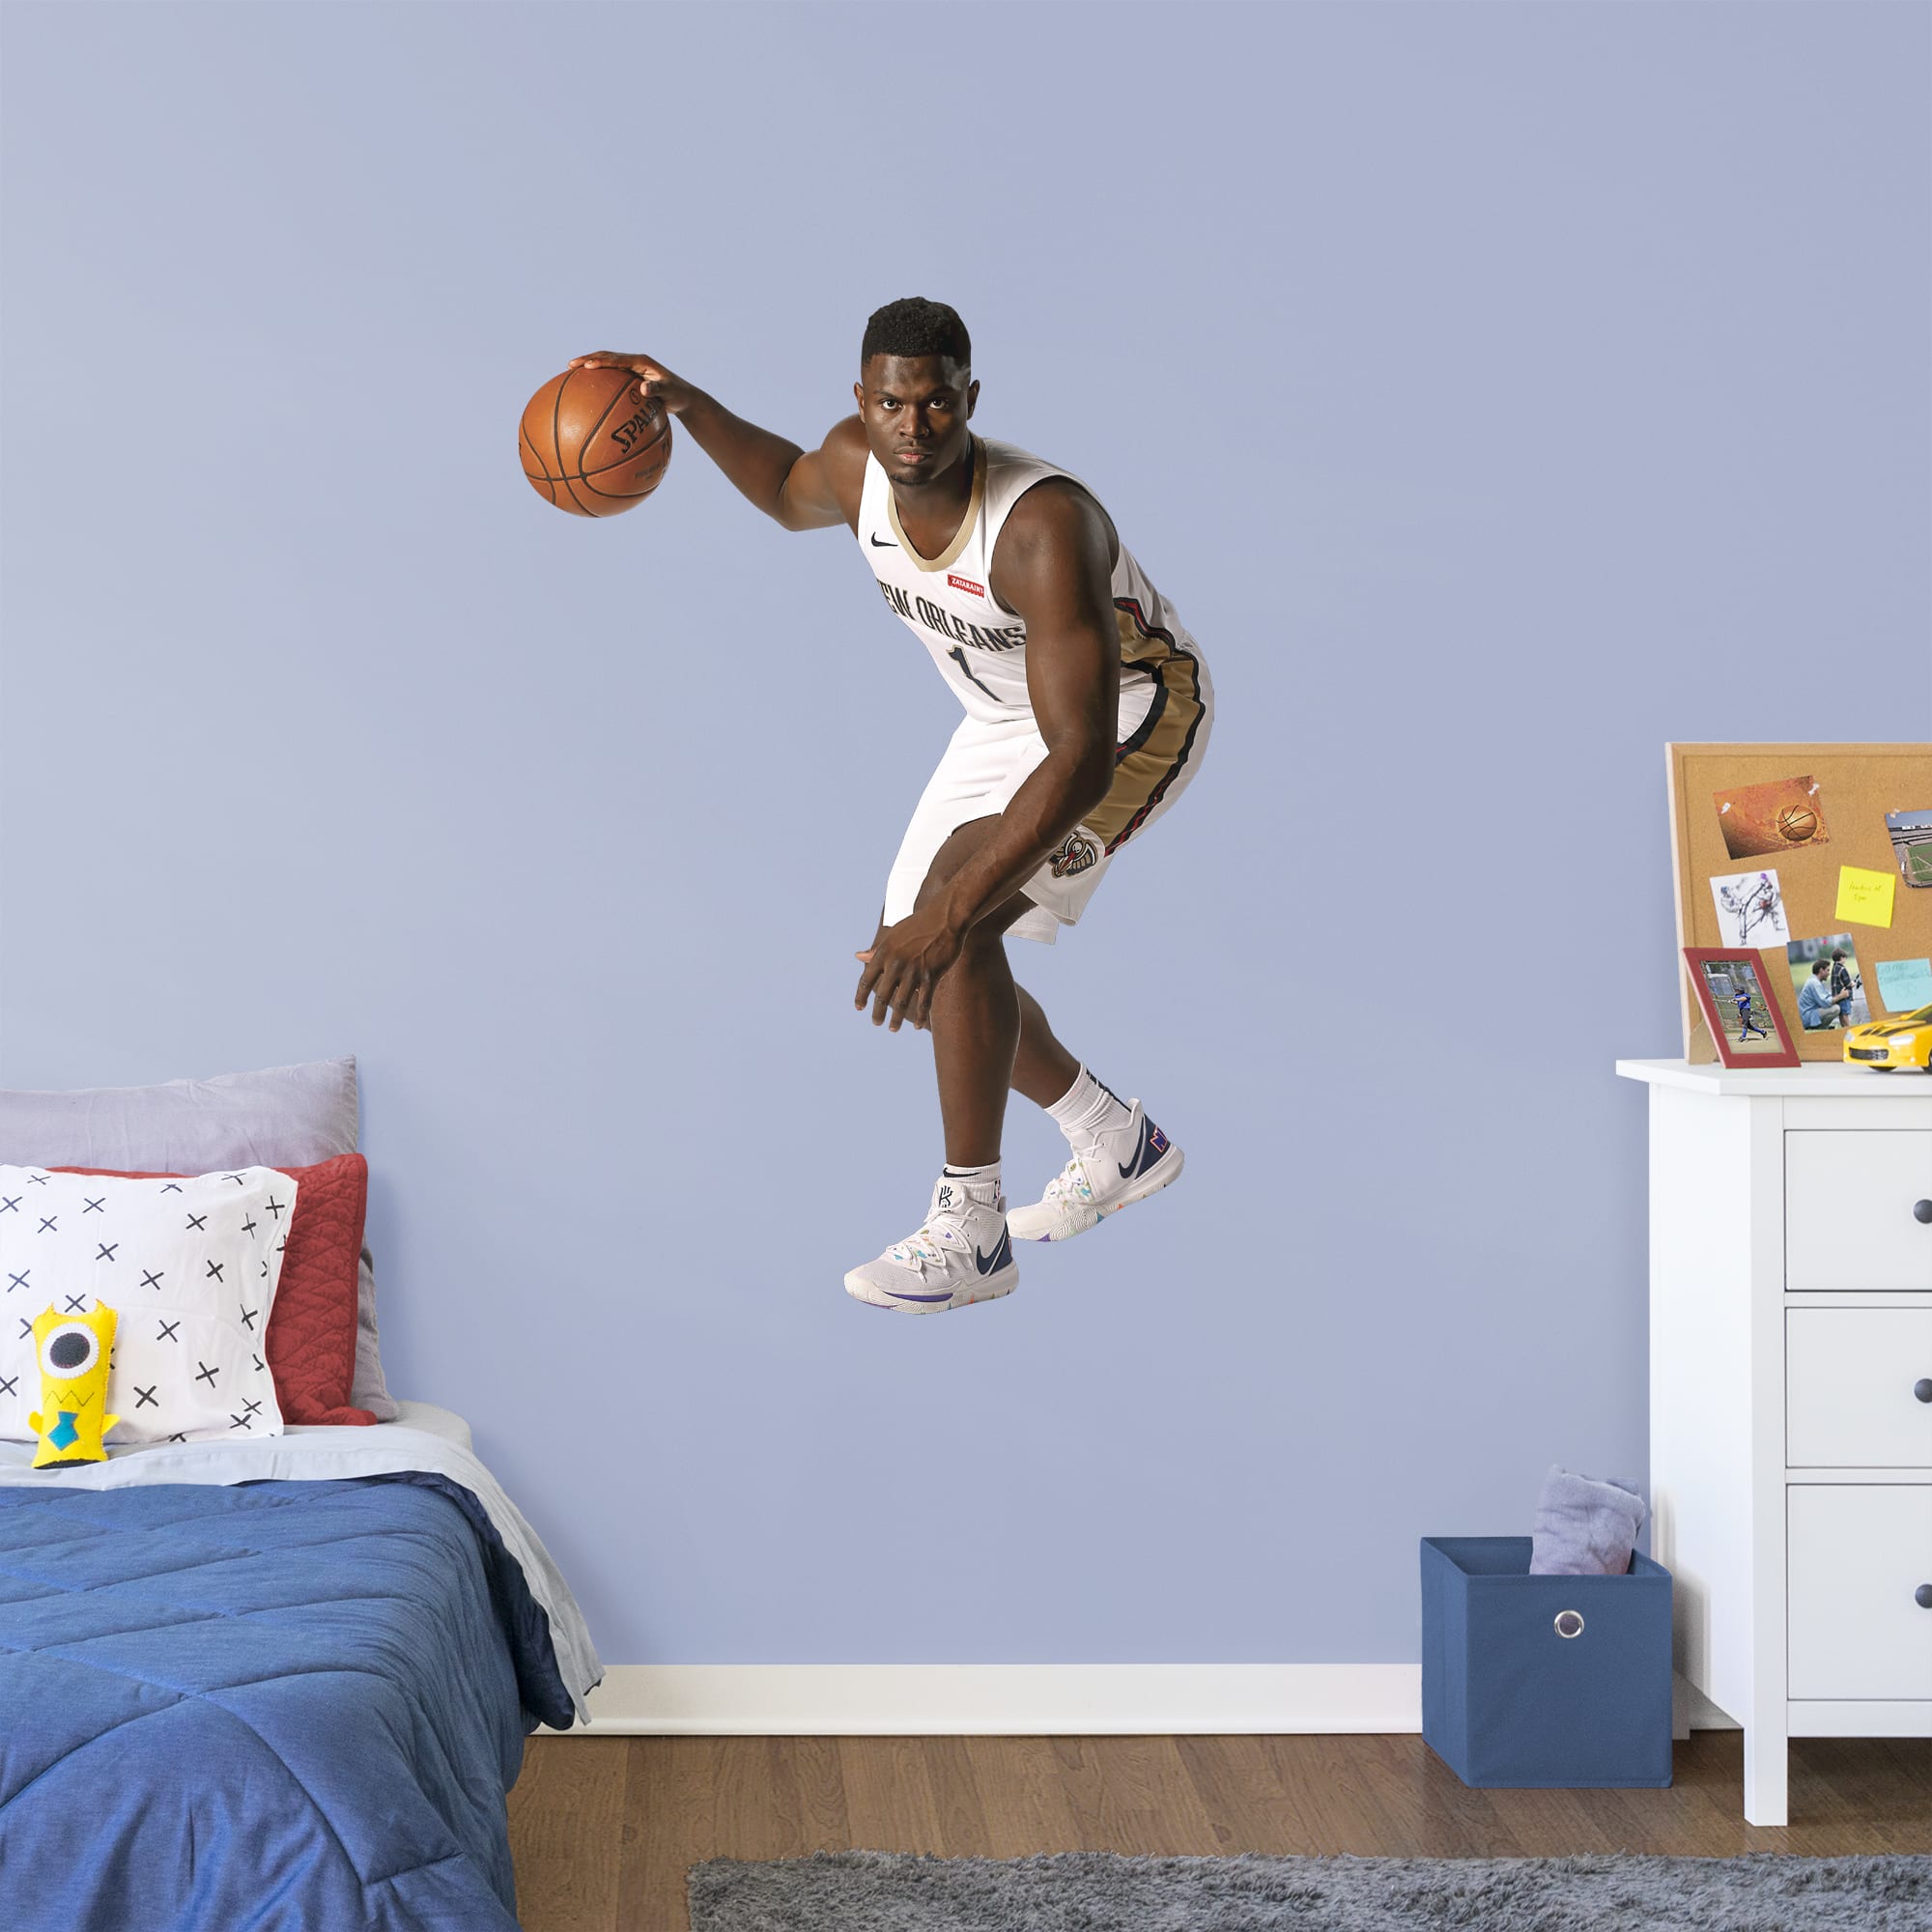 Zion Williamson for New Orleans Pelicans - Officially Licensed NBA Removable Wall Decal Giant Athlete + 2 Decals (35"W x 51"H) b